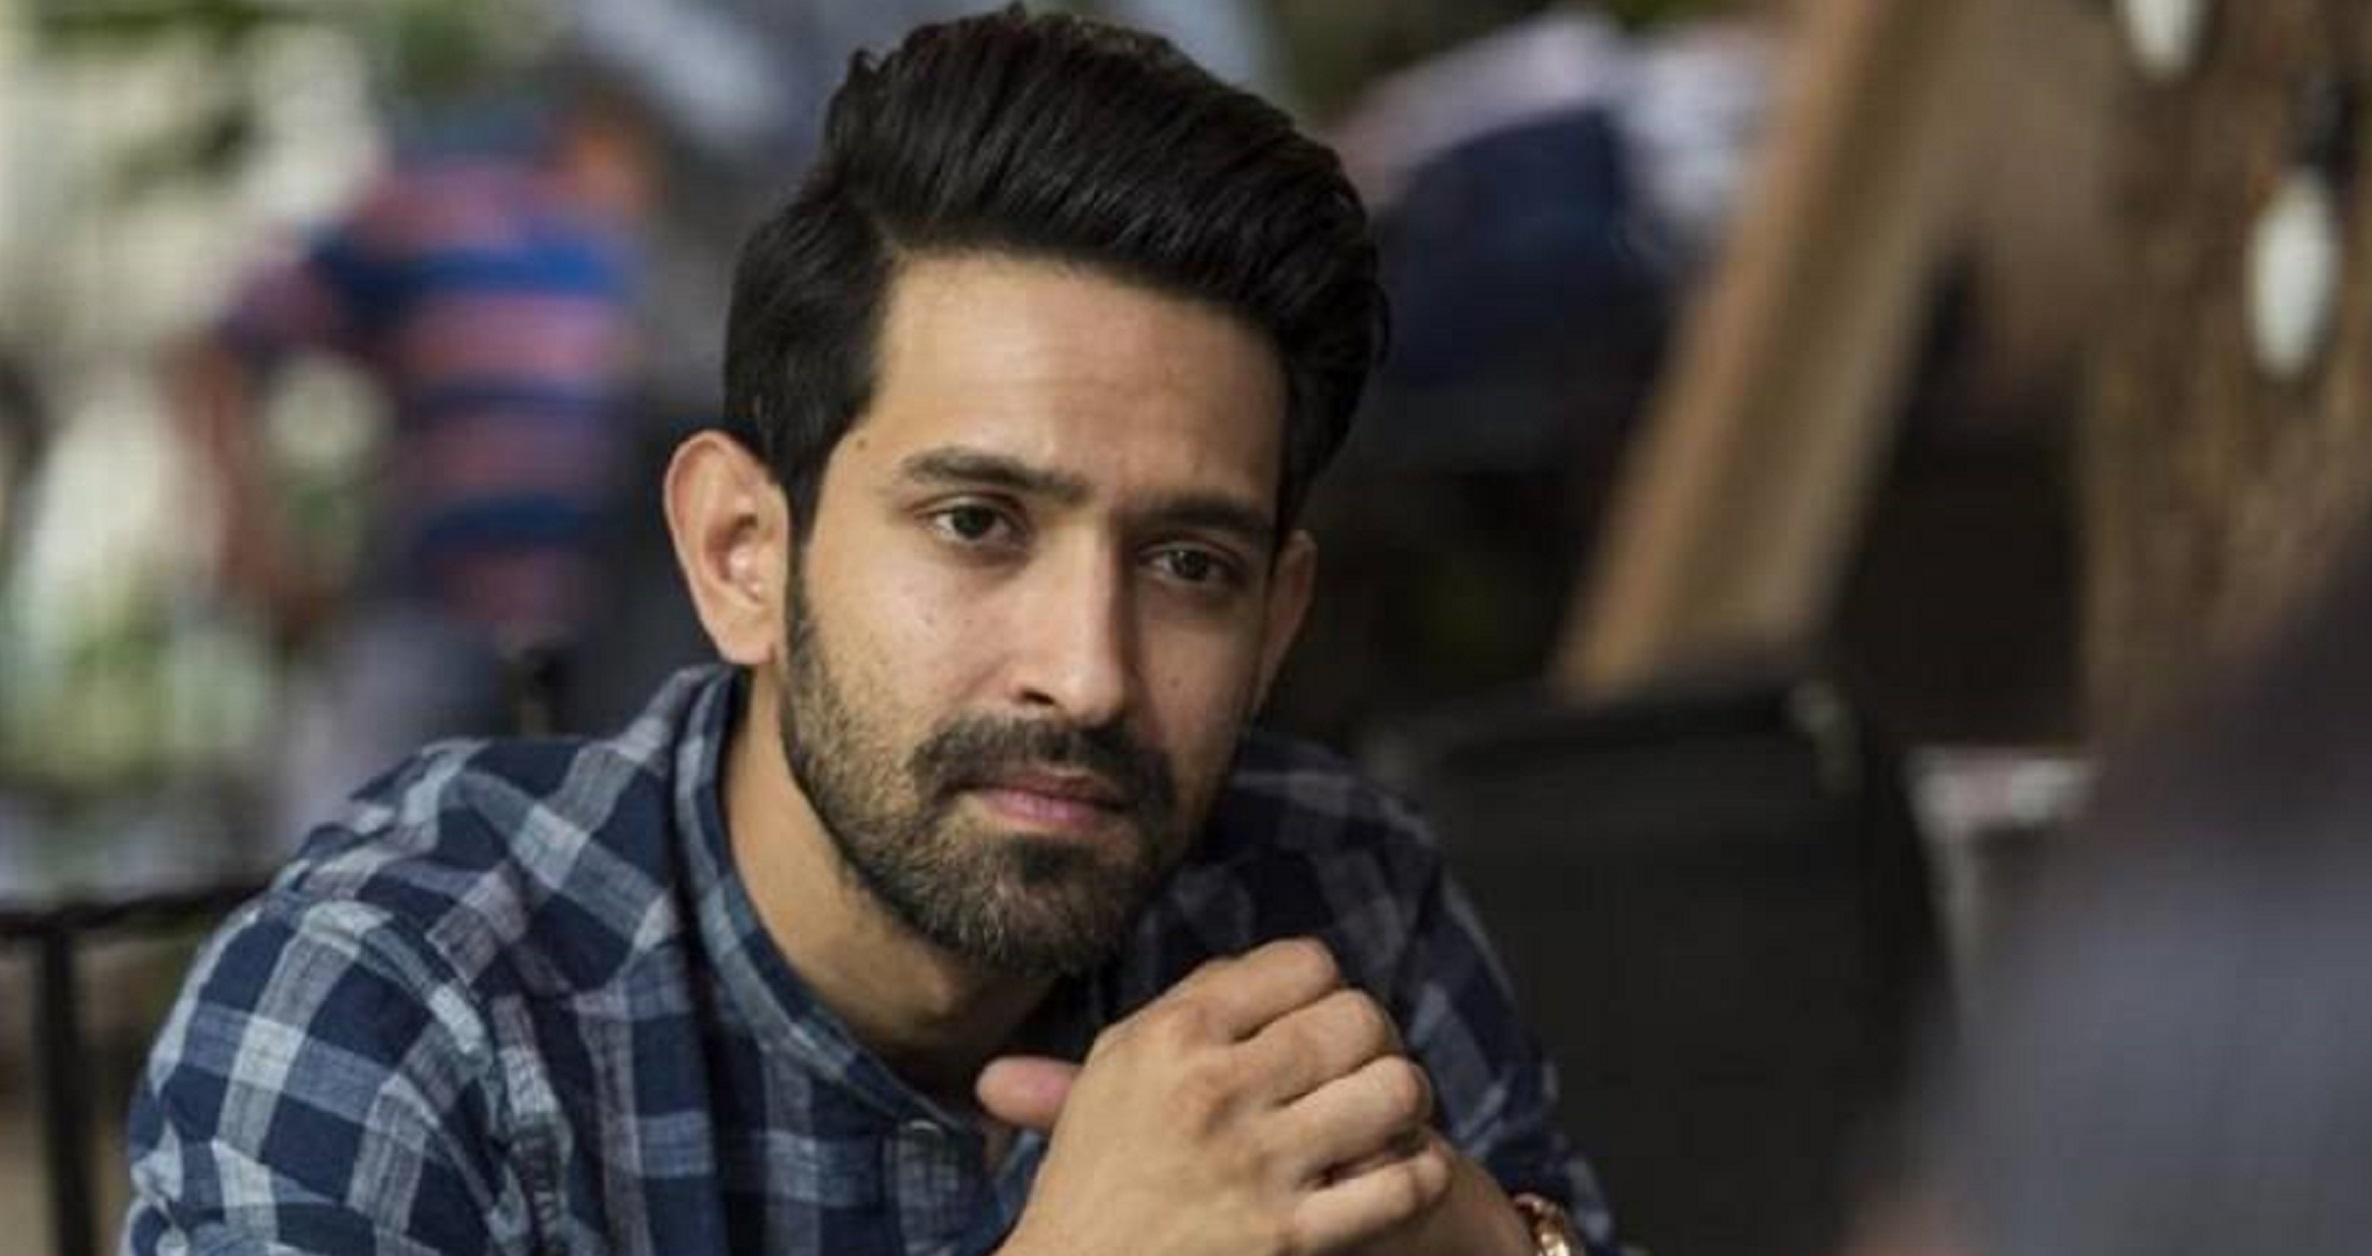 Vikrant Massey Was Told He’s Not “Quintessential Hero Material”, ‘It is tougher for outsiders,’ He Says